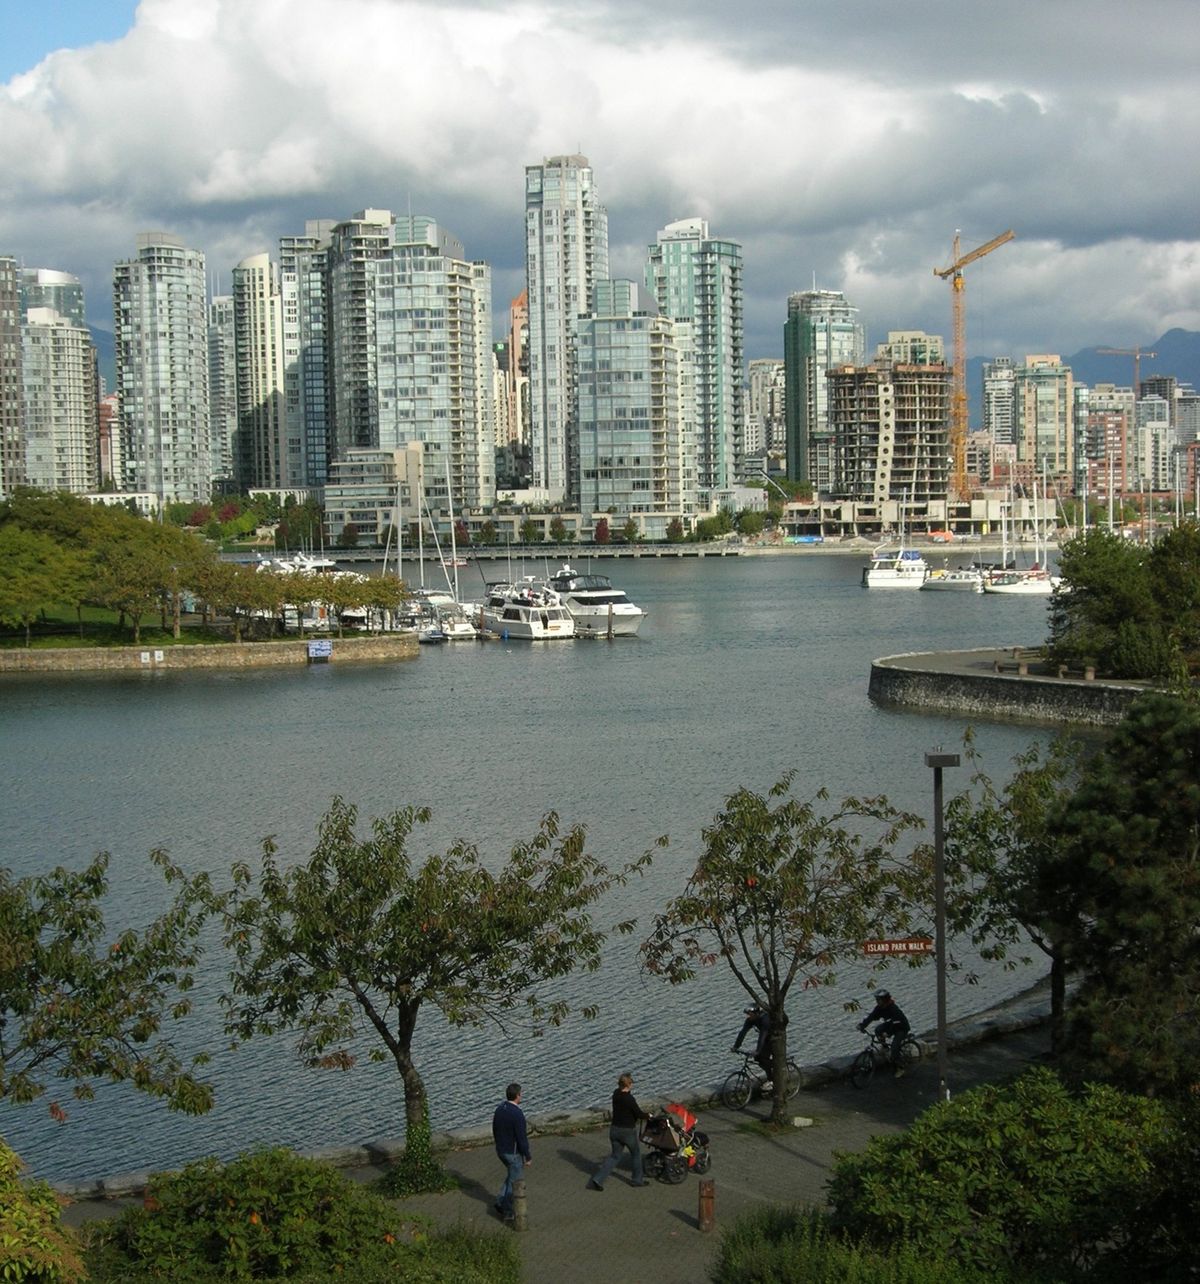 The False Creek walkway in Vancouver begins near Granville Island and winds around to the north shore of the inlet where there’s a forest of high-rise condos.